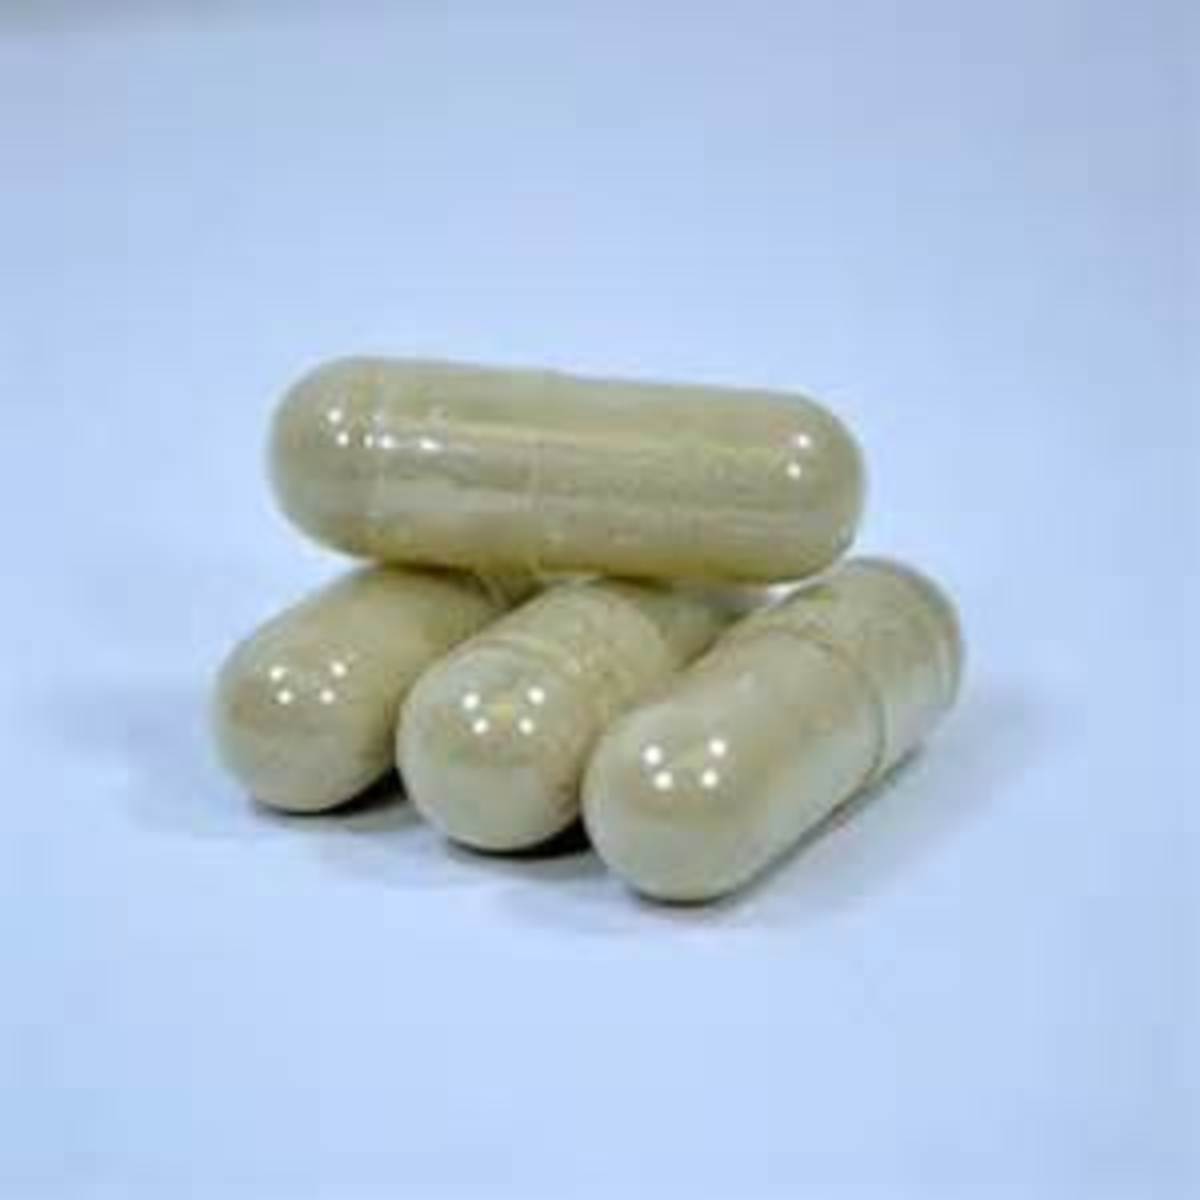 Typical hoodia diet pill capsule. (Usually they are sold in powder form. 